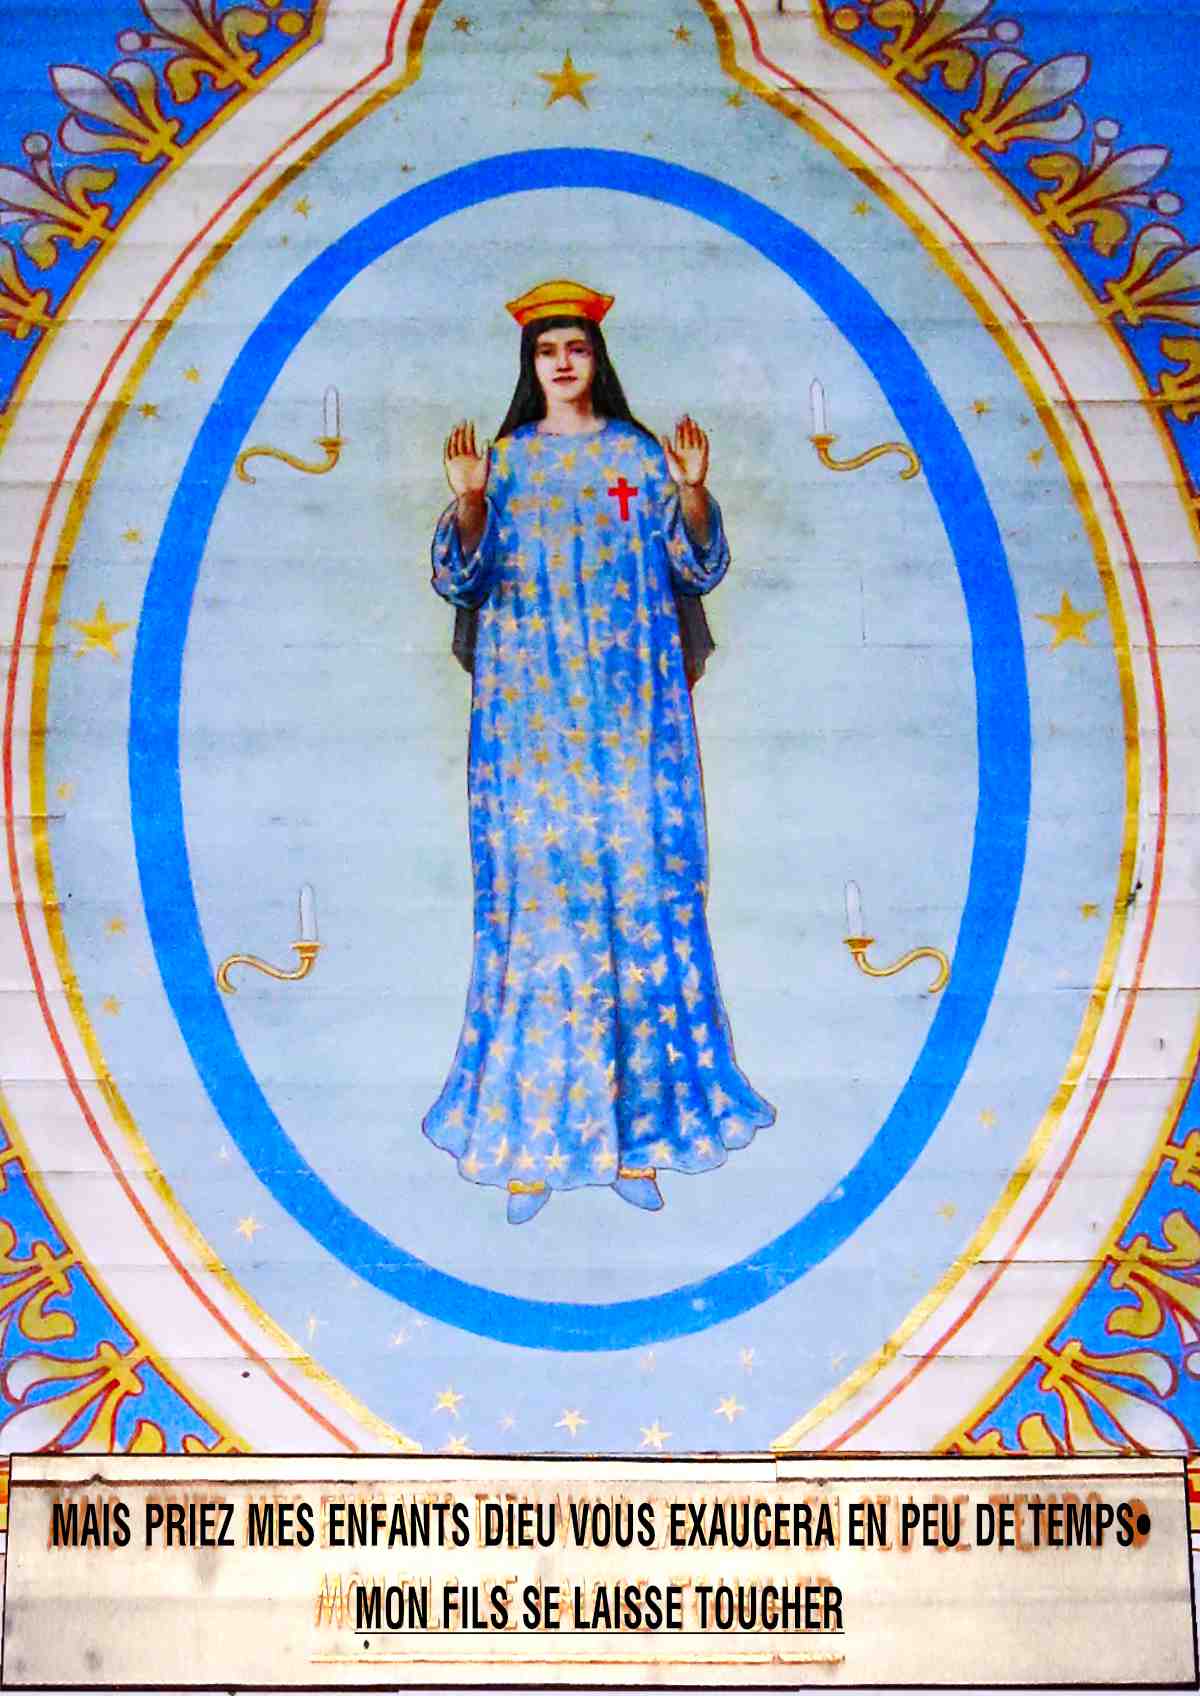 Our Lady of Pontmain, 3rd Phase of Apparition